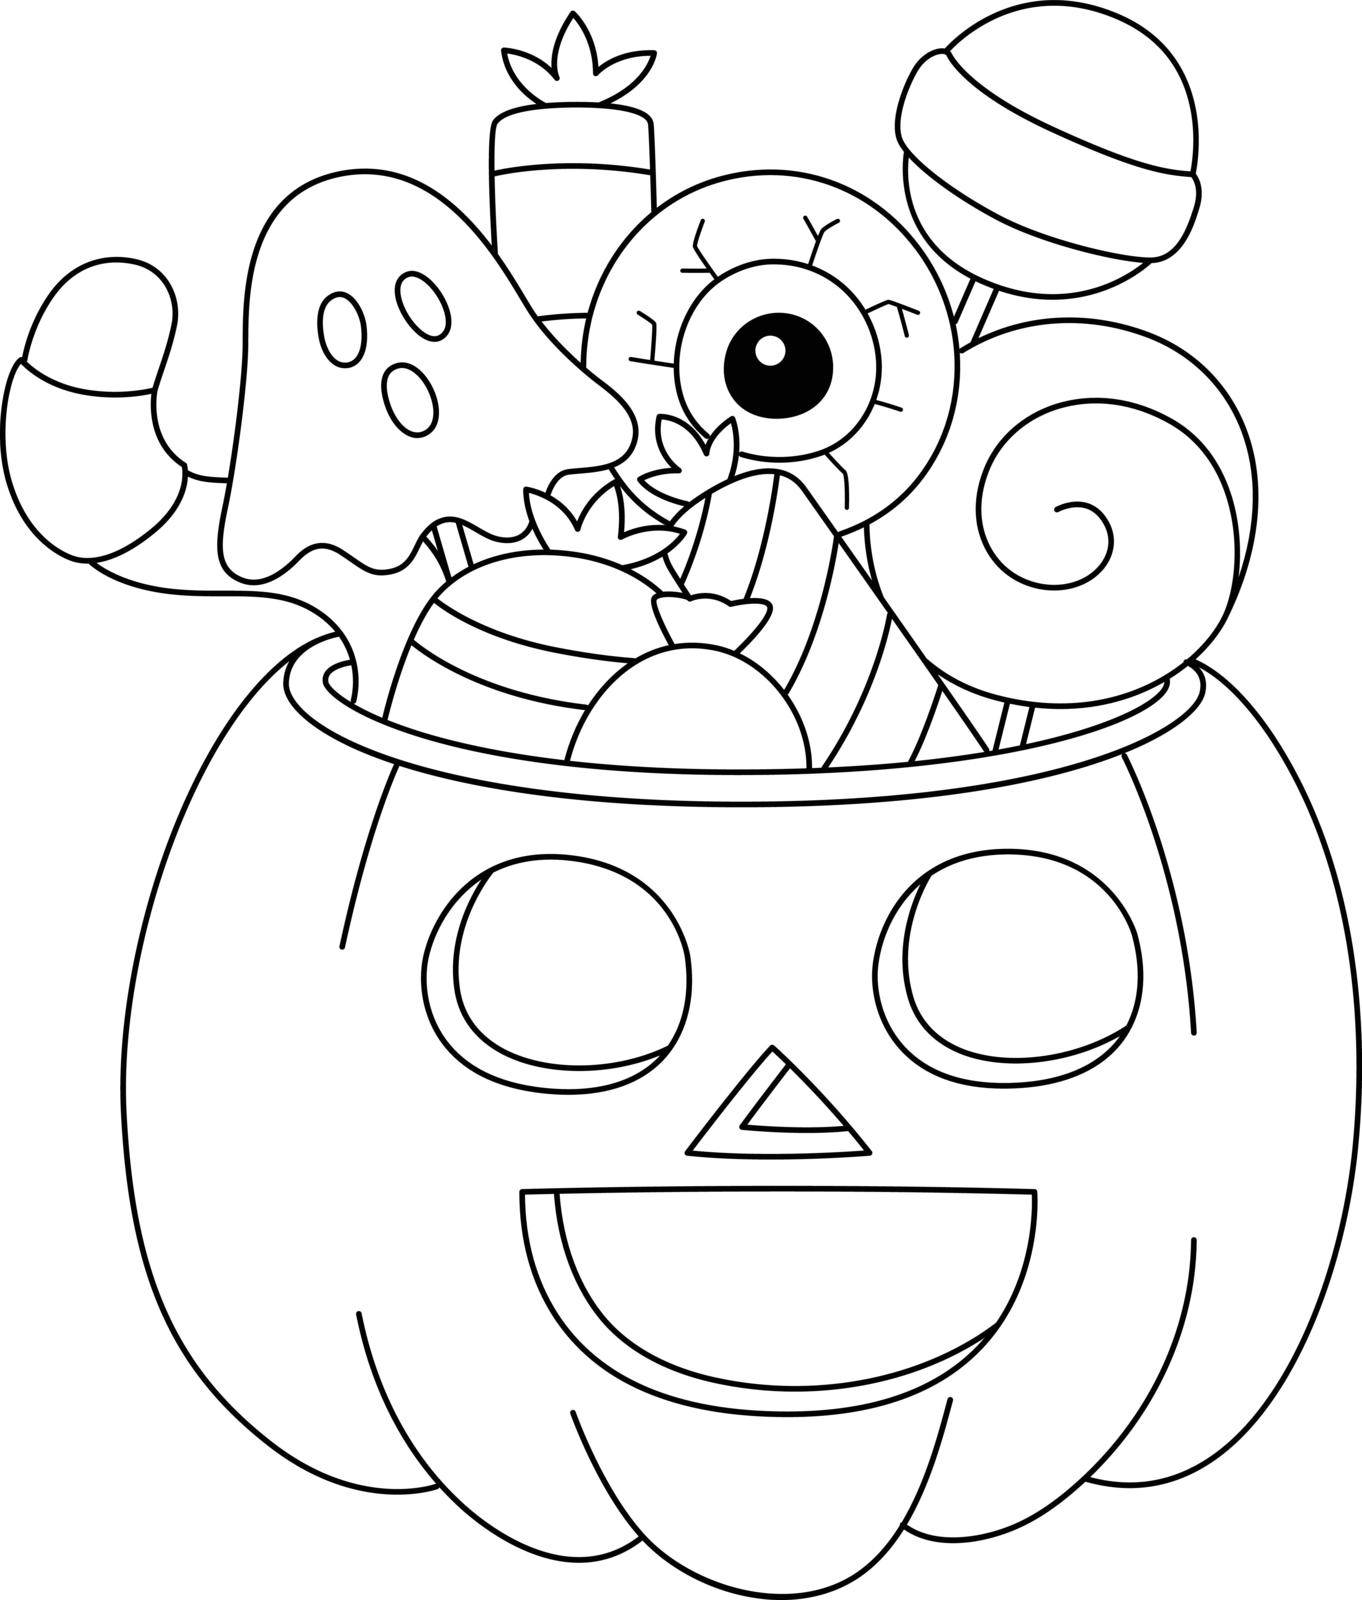 A cute and funny coloring page a trick-or-treat pumpkin. Provides hours of coloring fun for children. To color, this page is very easy. Suitable for little kids and toddlers.